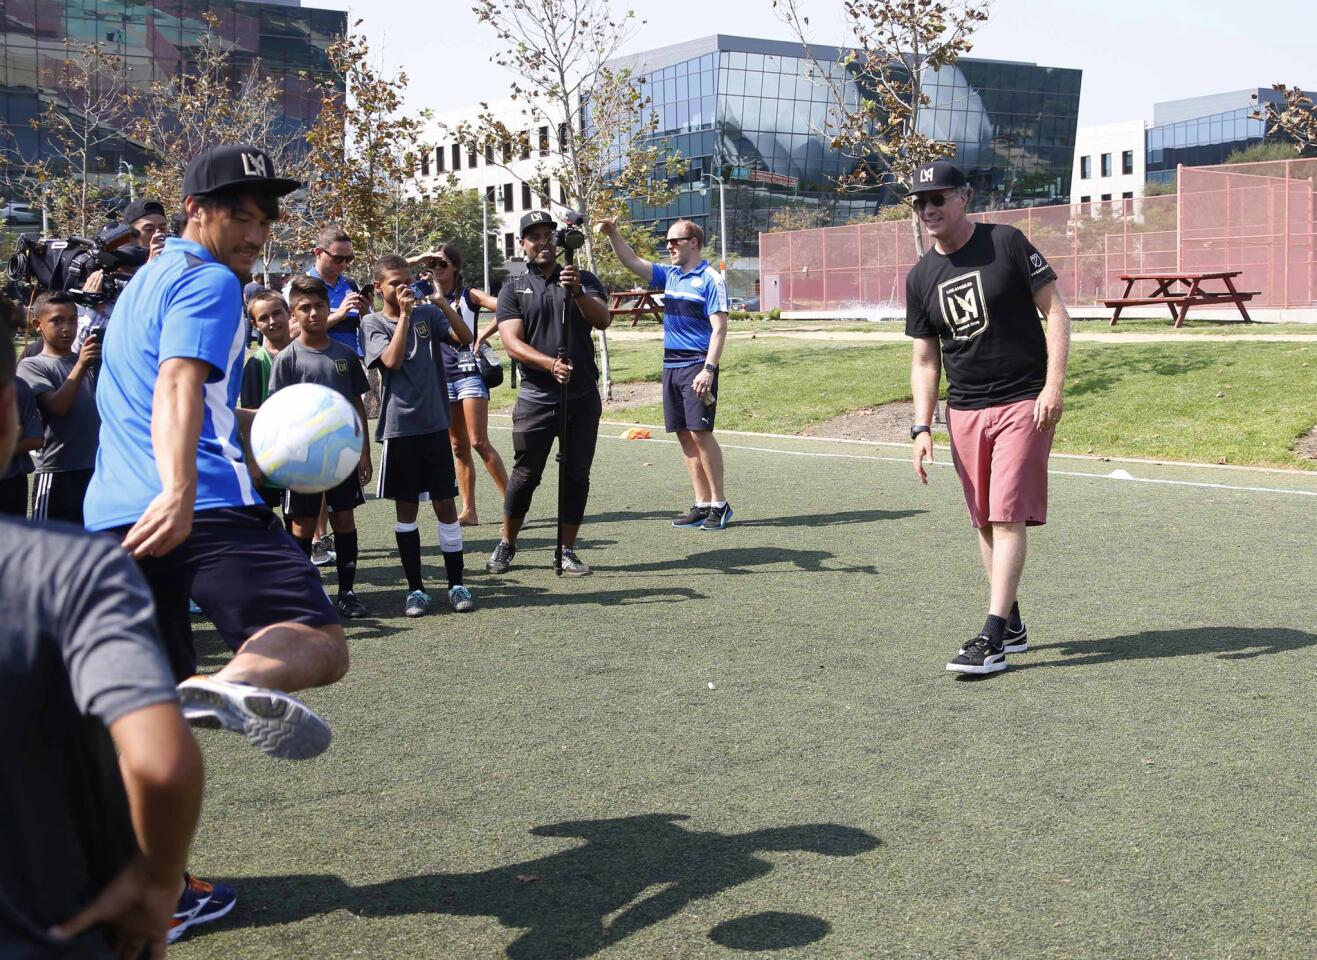 Actor Will Ferrell, right, co-owner of the Los Angeles Football Club, and Leicester City's Shinji Okazaki play during a soccer clinic and practice at the Central Park at Playa Vista in Los Angeles on Friday, July 29, 2016. Leicester City is scheduled to face Paris Saint-Germain on Saturday in an International Champions Cup soccer match. (AP Photo/Nick Ut)